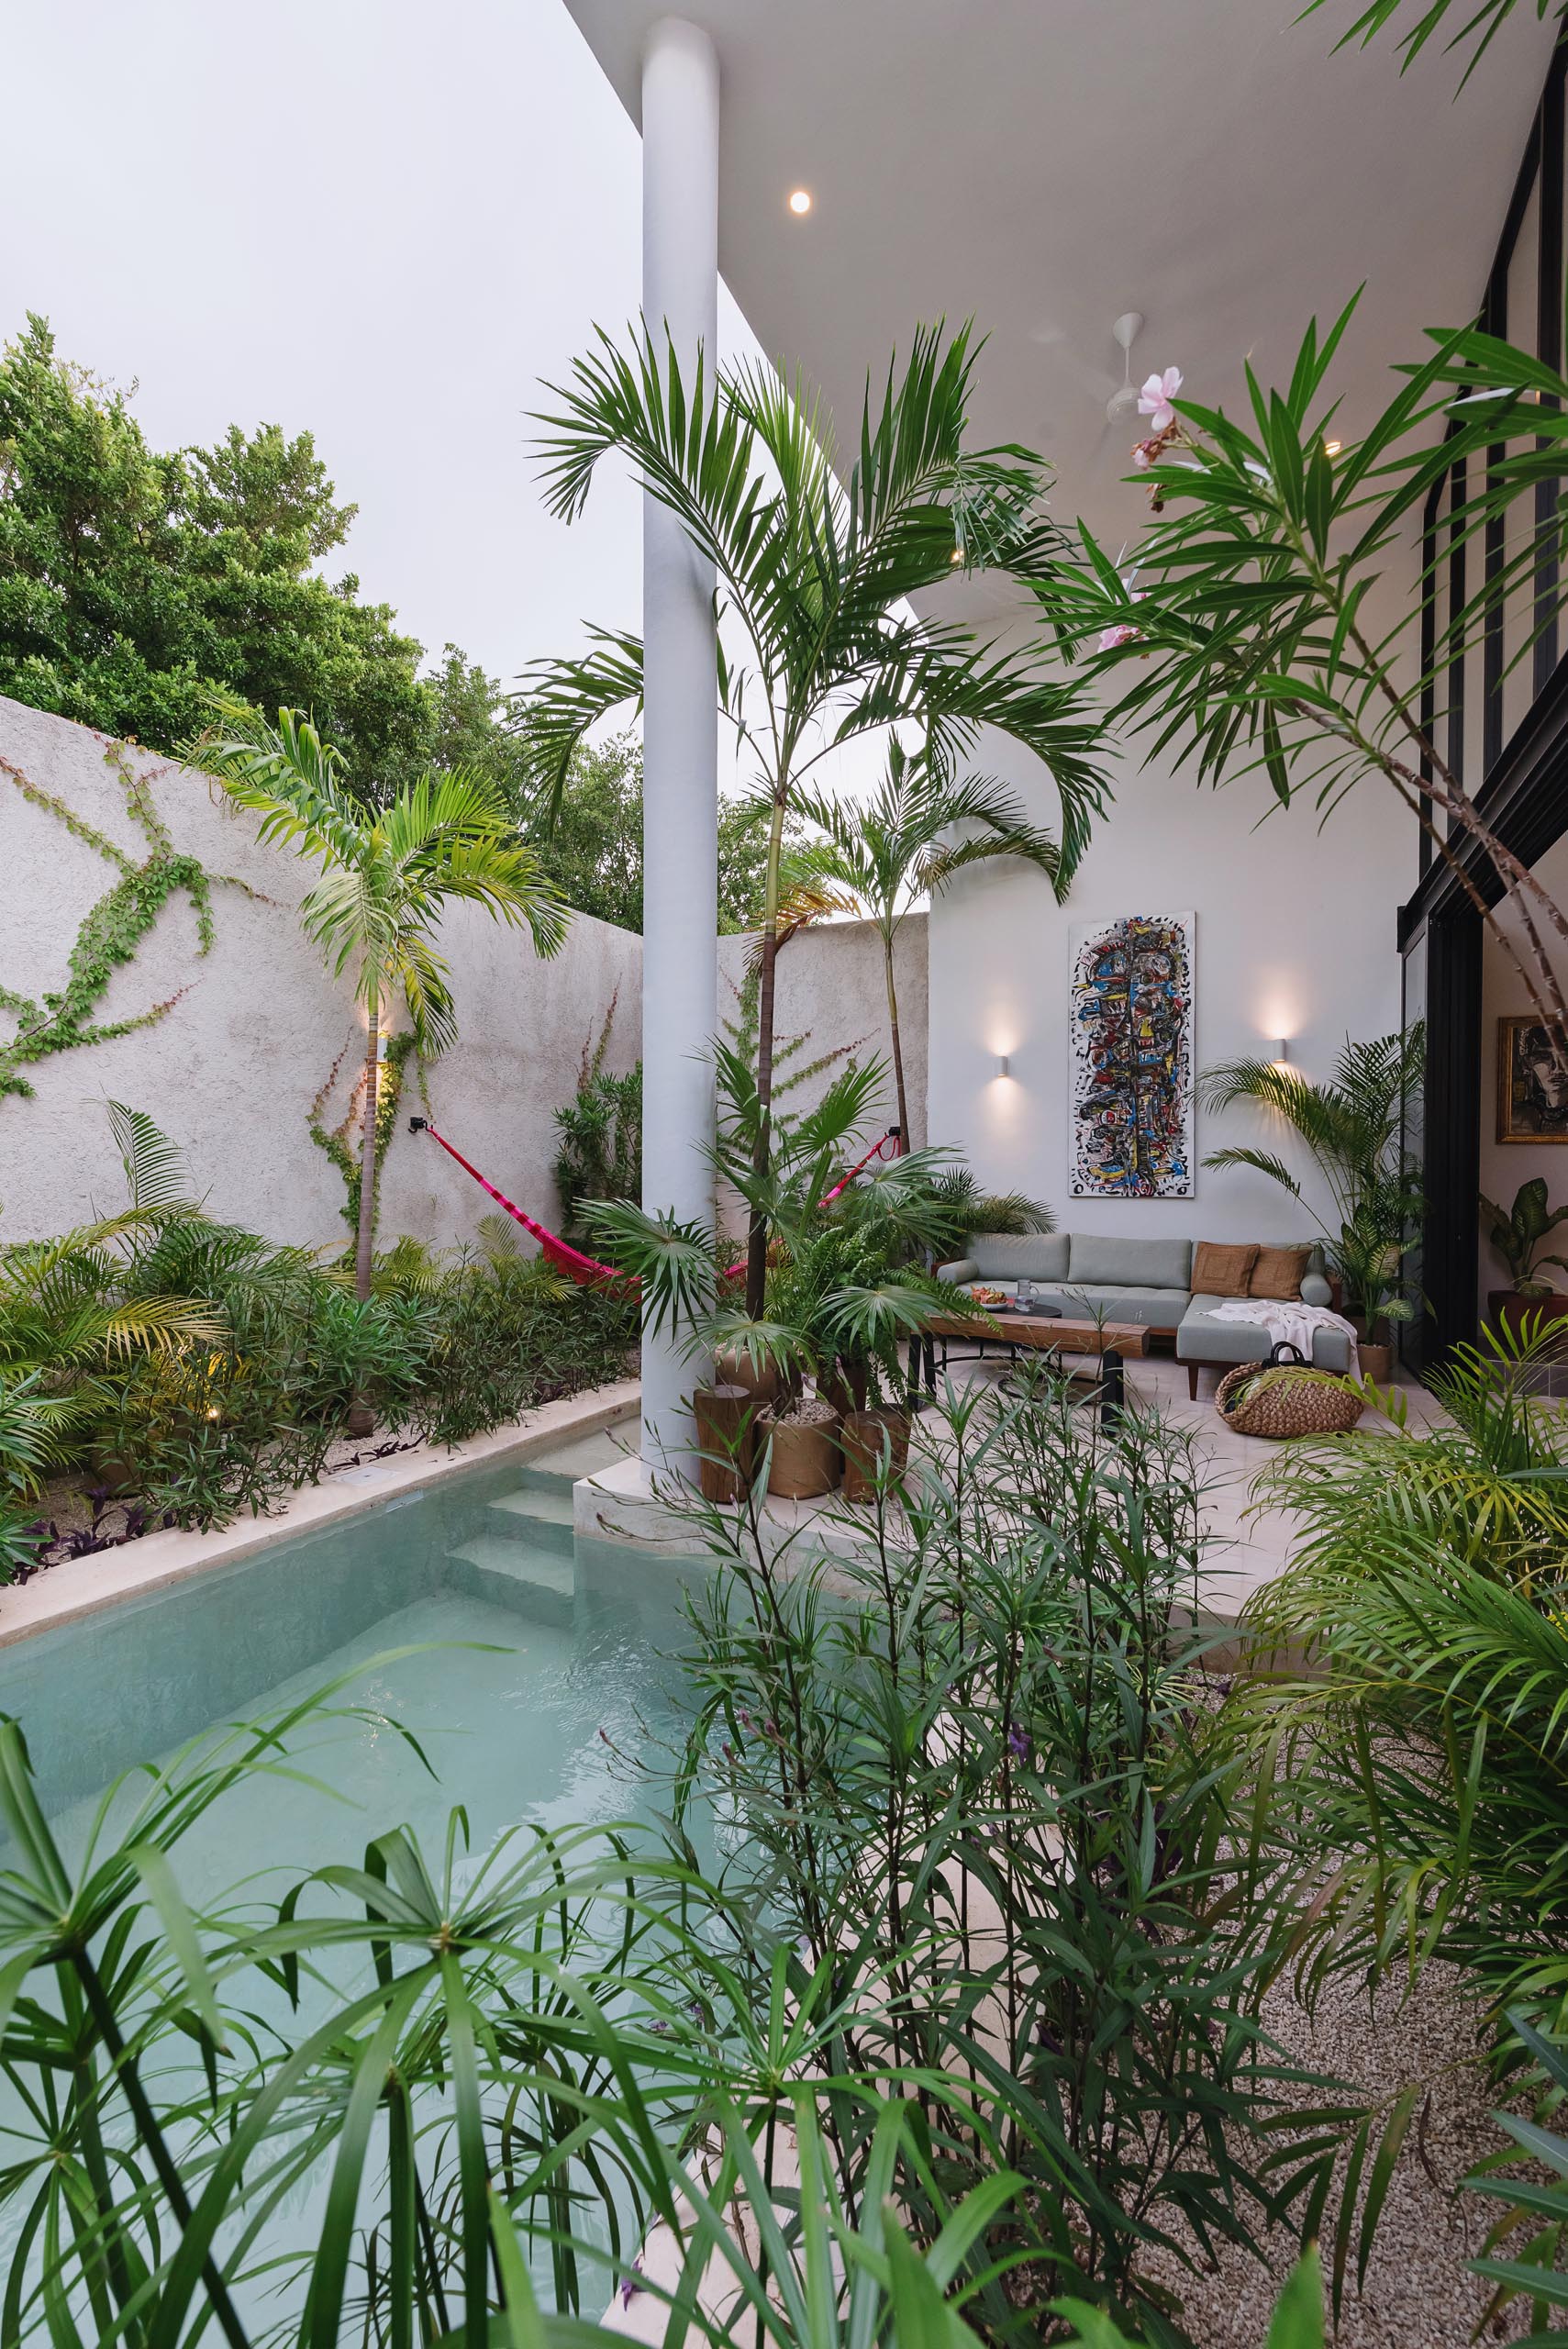 A small house with an outdoor living room, tropical plants, and small pool.